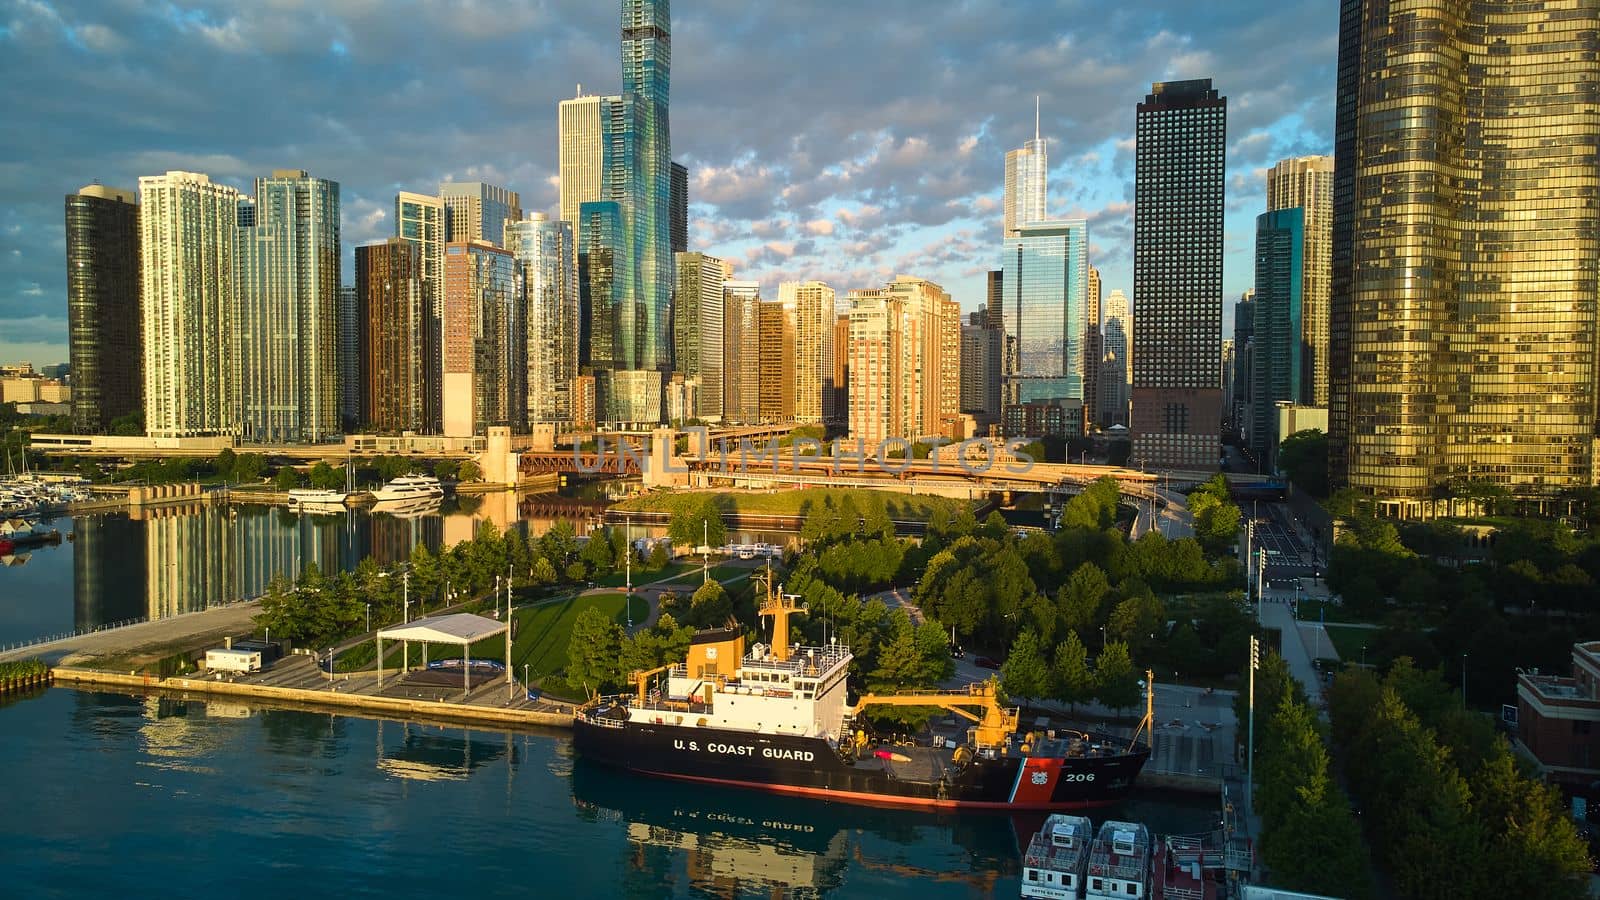 Image of U.S Coastguard on Navy Pier in Chicago with stunning skyline in morning light